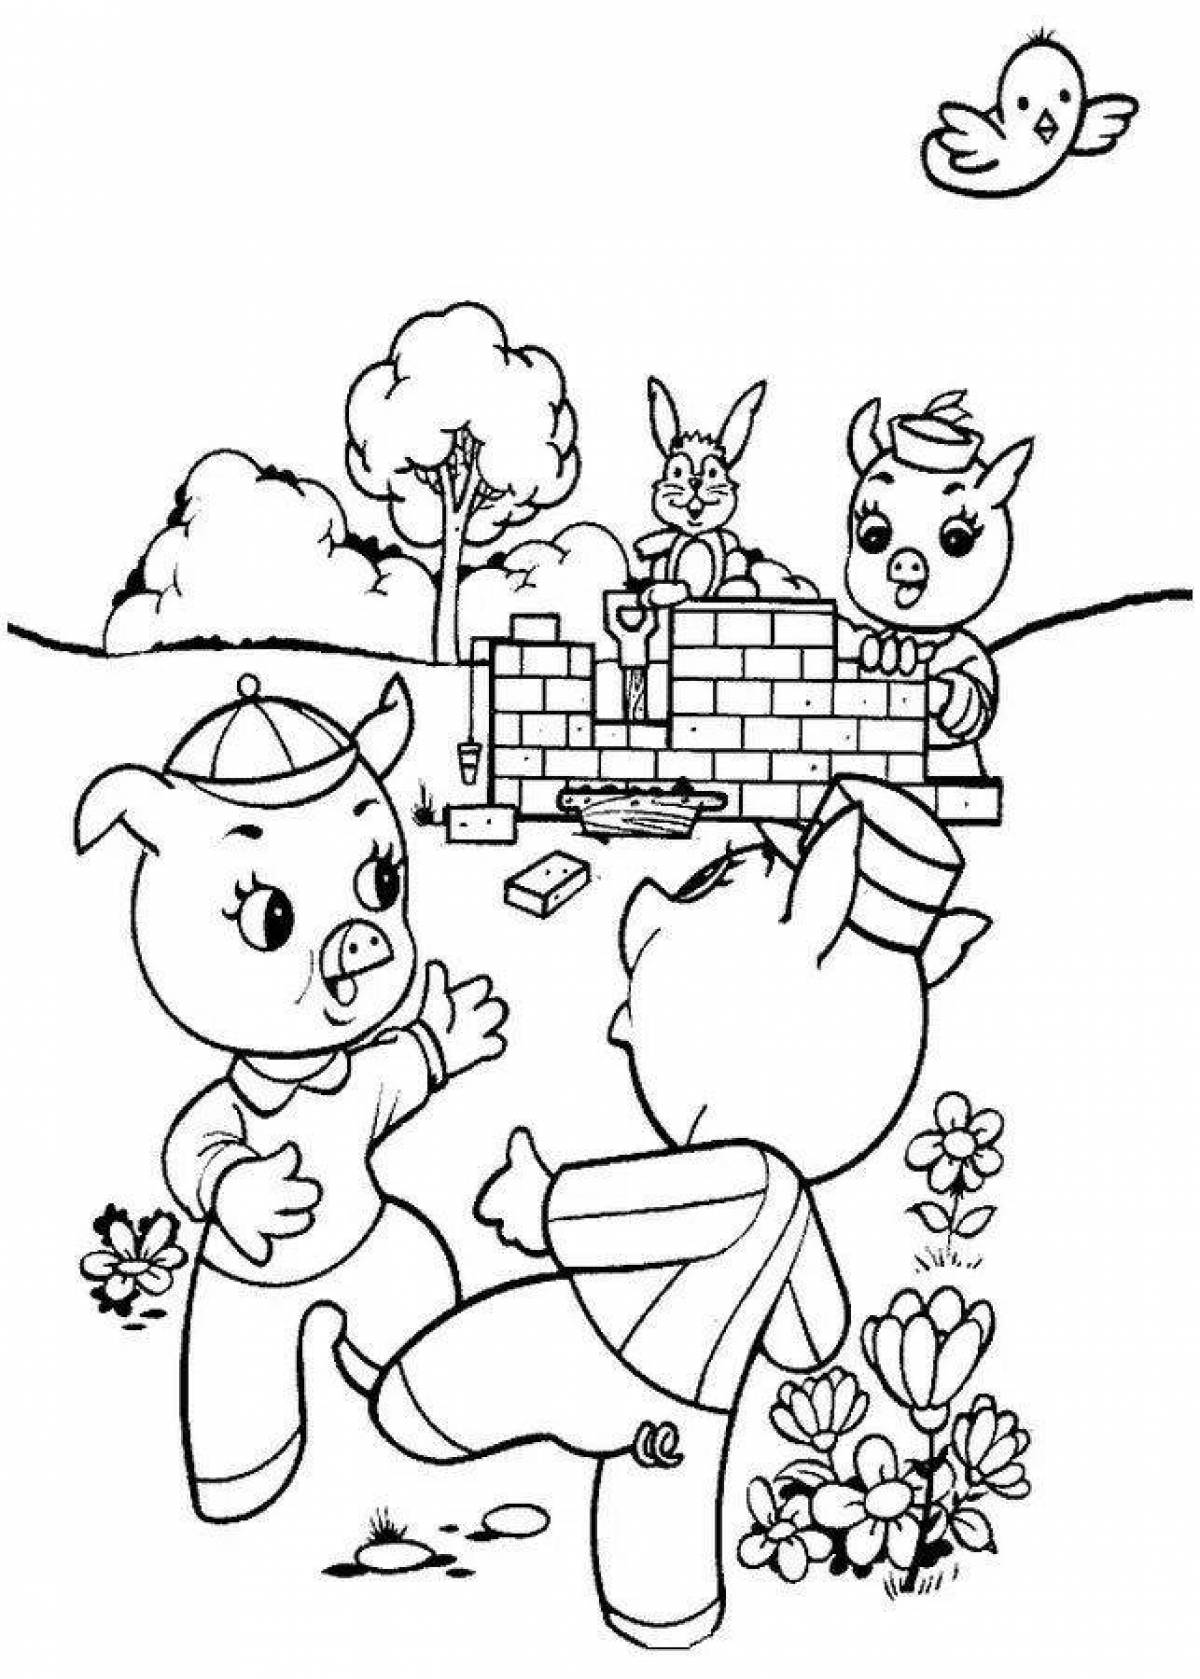 Color-lively 3 pigs coloring book